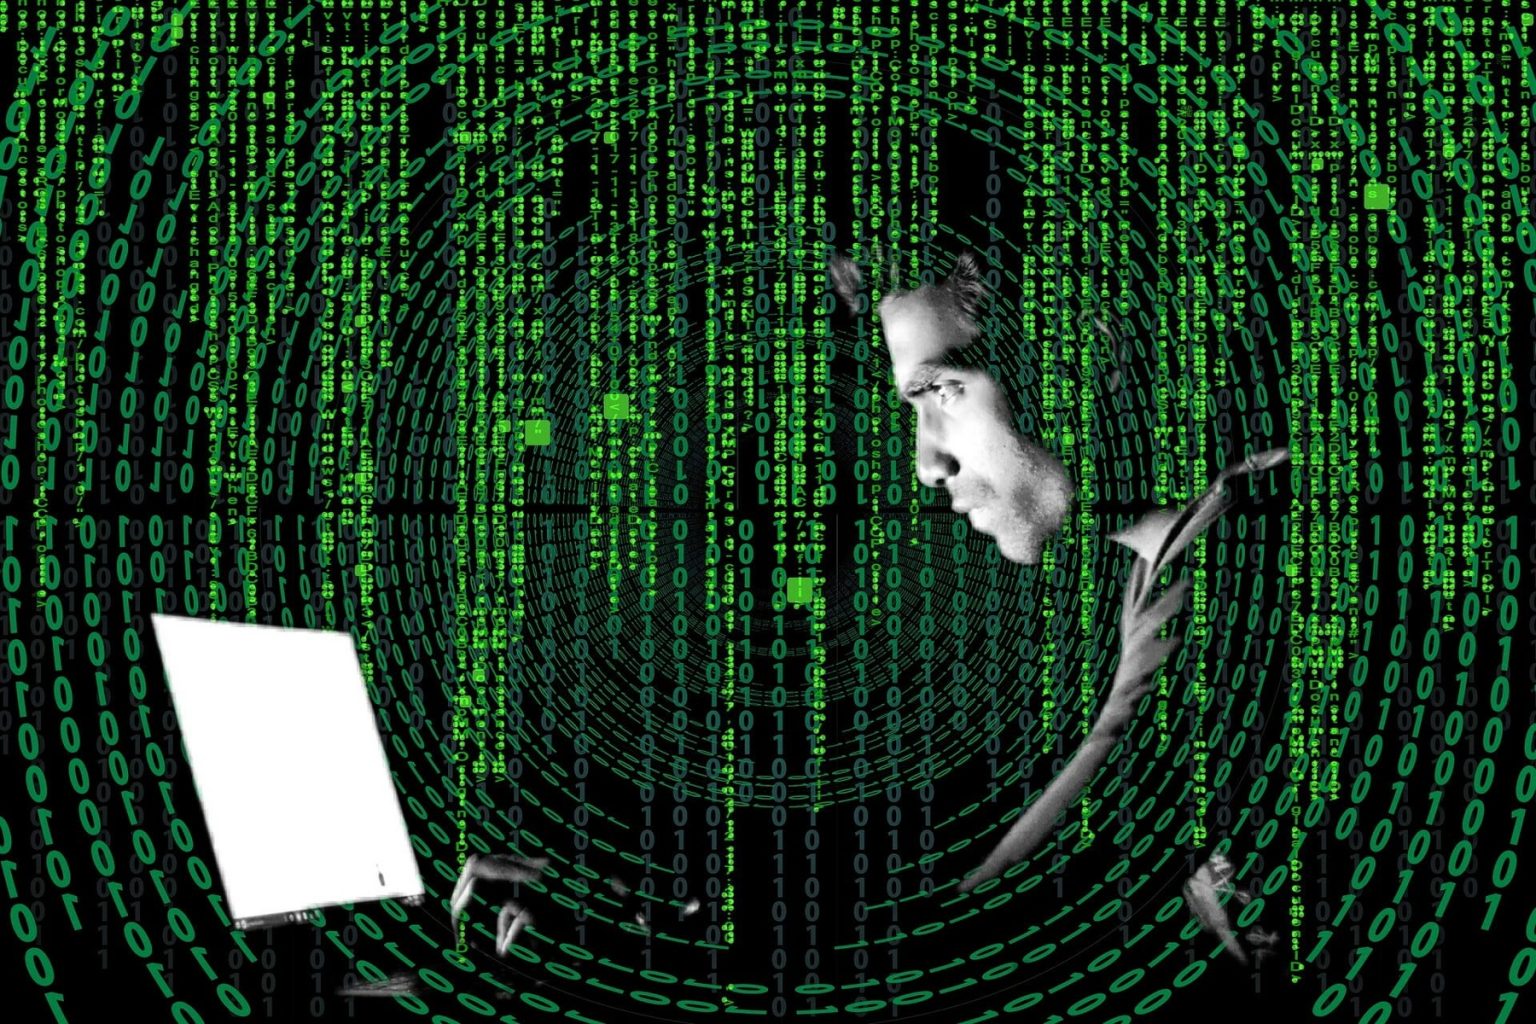 side view of mysterious half-lit man looking at a computer screen, surrounded by concentric circles of ones and zeroes and Matrix-like vertical computer code all in glowing green on a black background